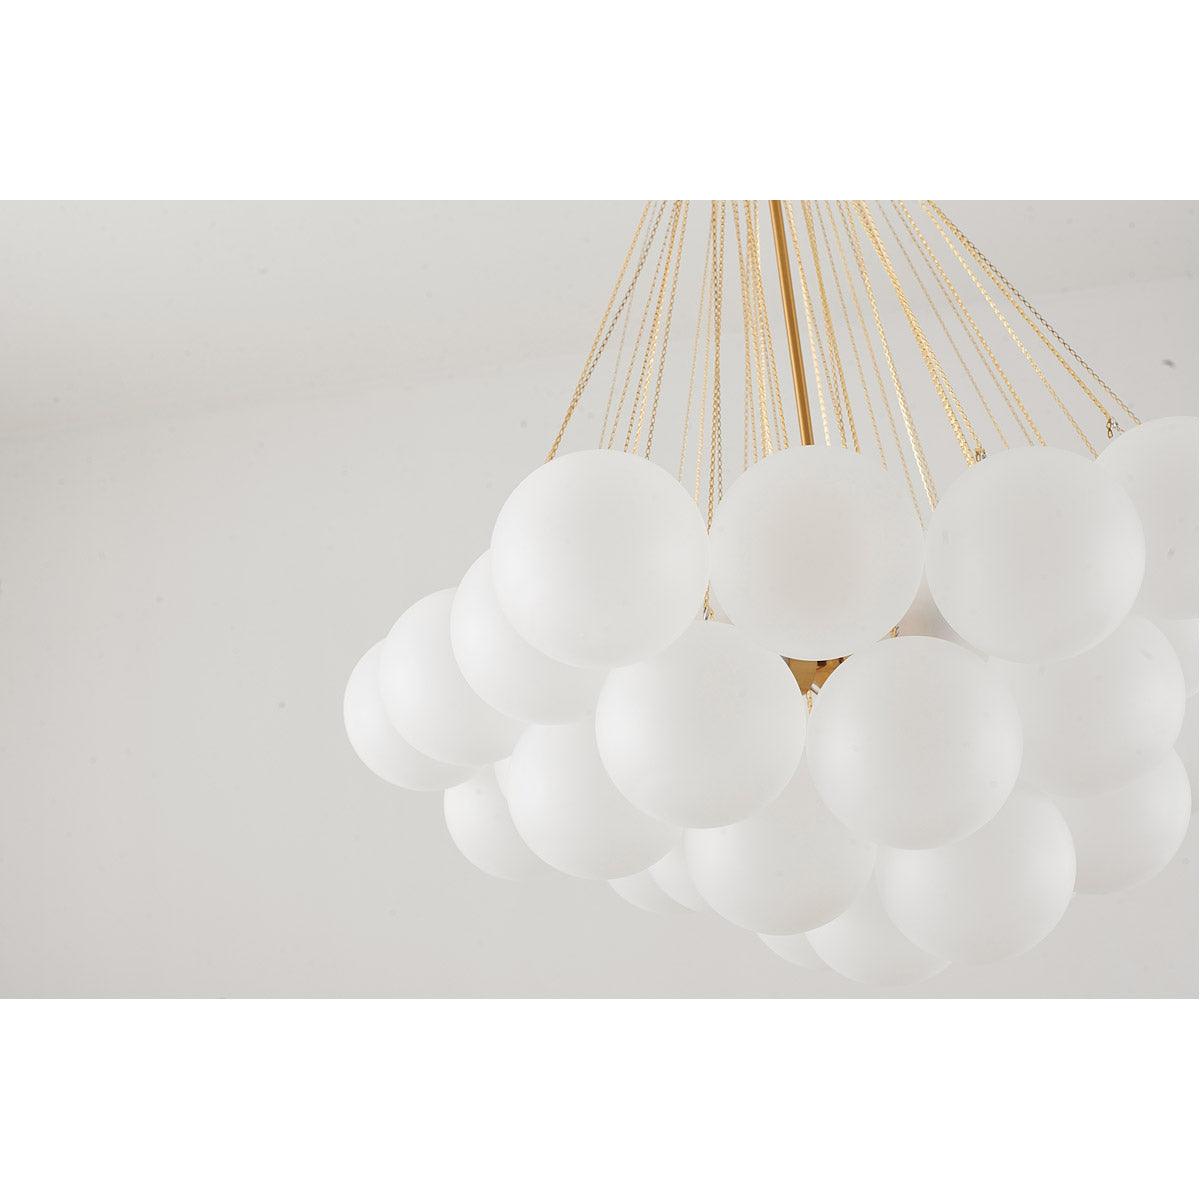 Gold Plated Frame with White Frosted Glass Globe Shade Chandelier - LV LIGHTING